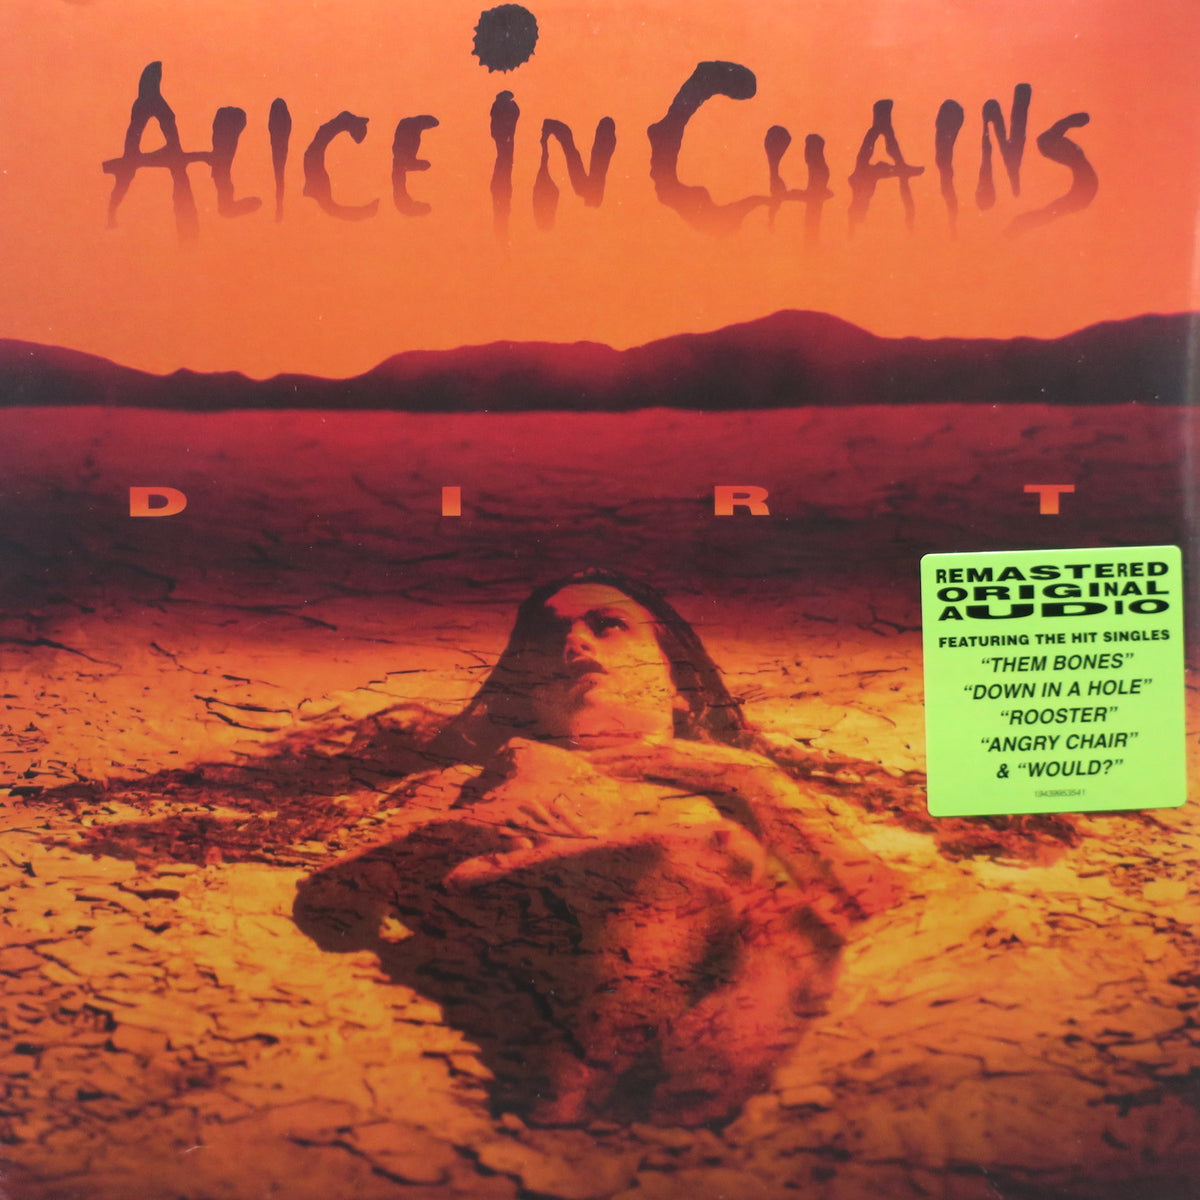 ALICE IN CHAINS 'Dirt' 30th Anniversary Remastered Vinyl 2LP – GOLDMINE ...